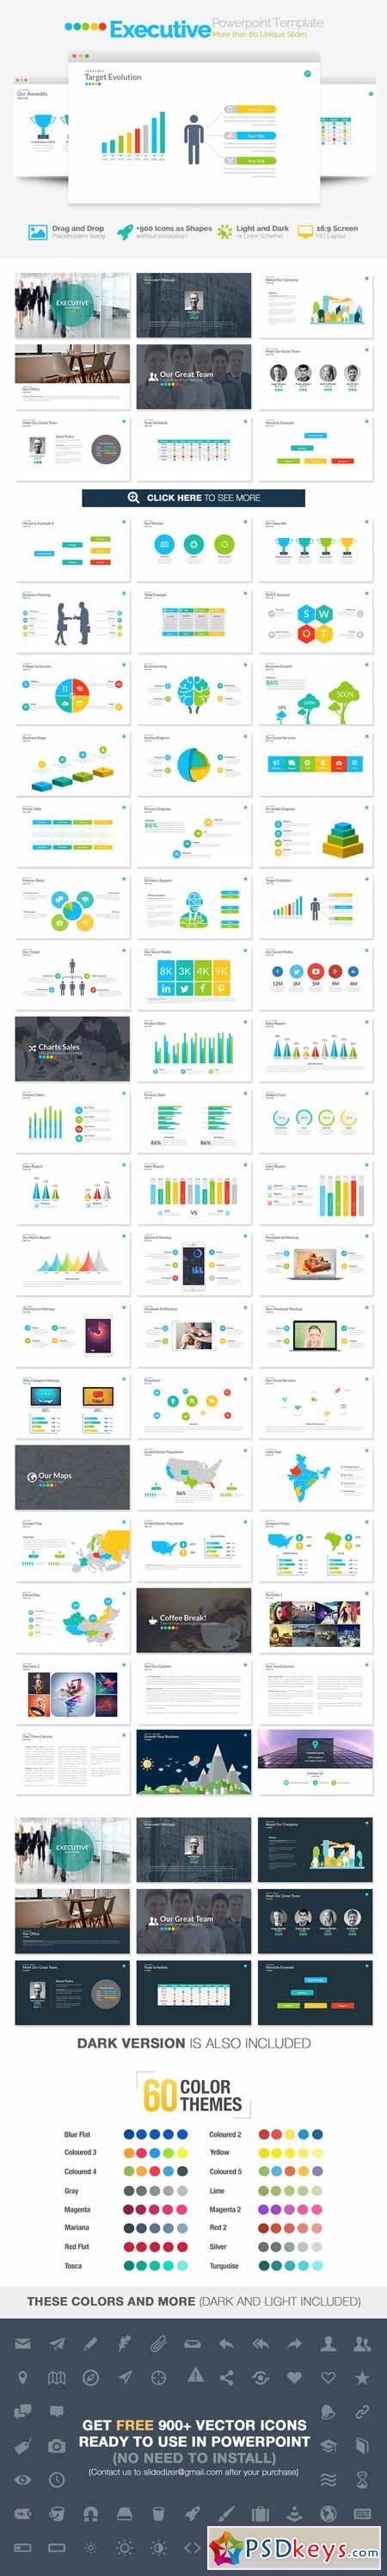 Executive Powerpoint Template 263187